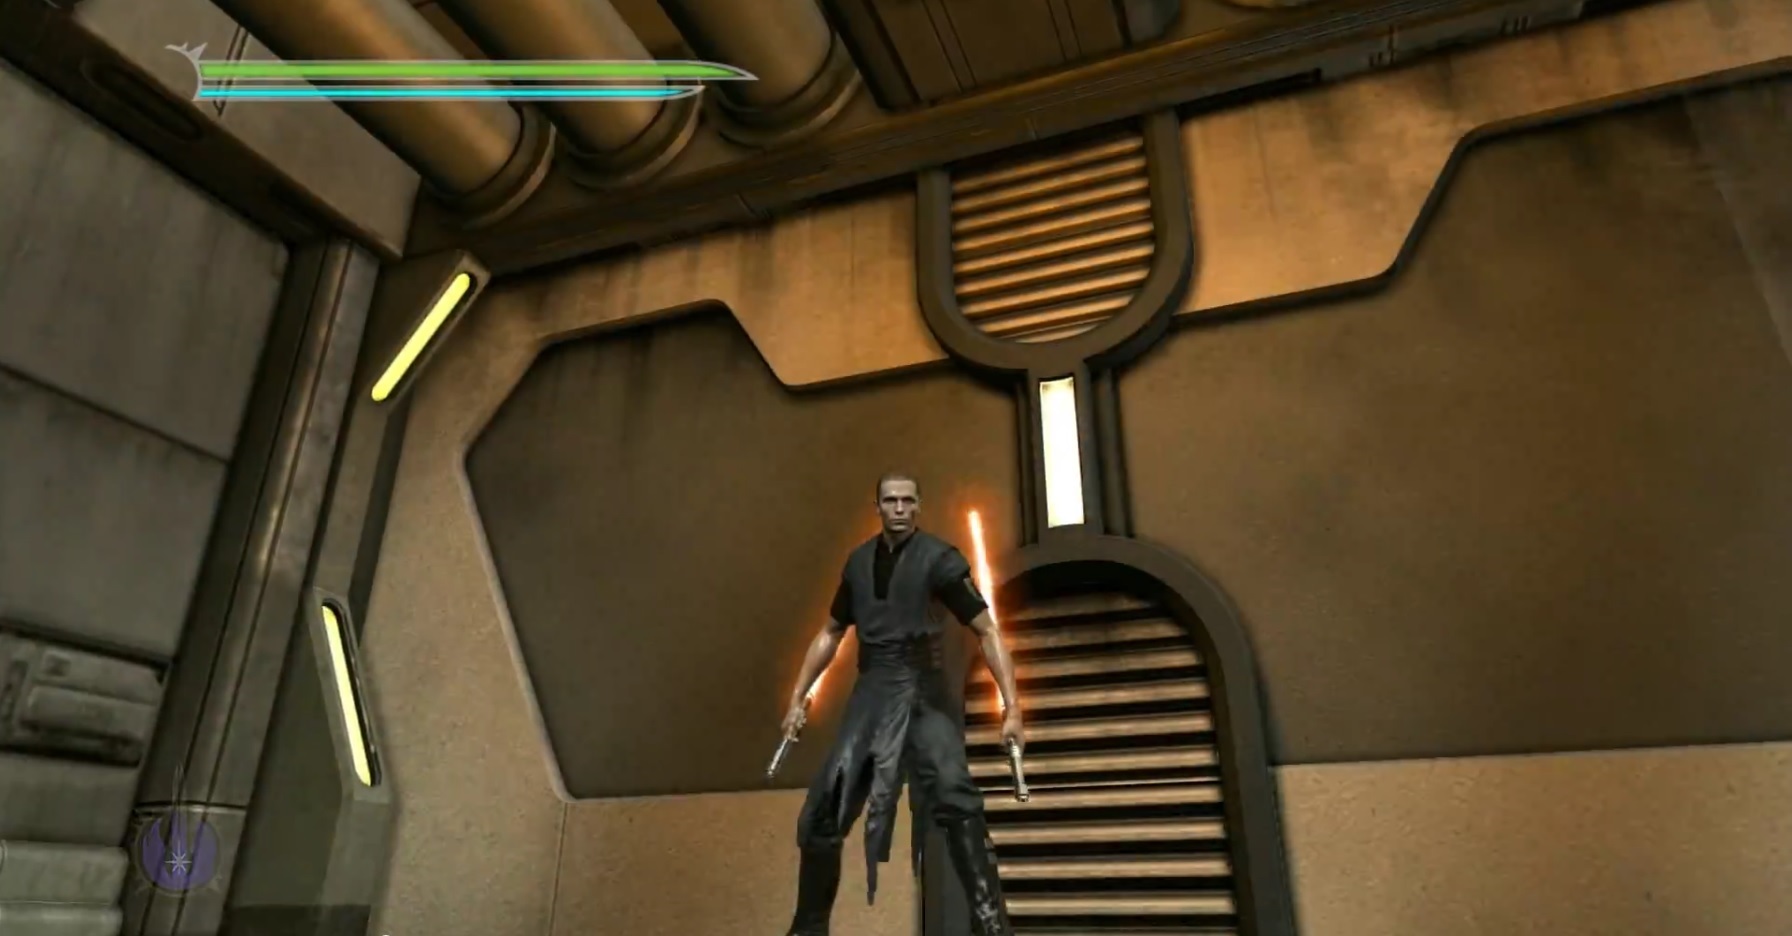 force unleashed 2 mods